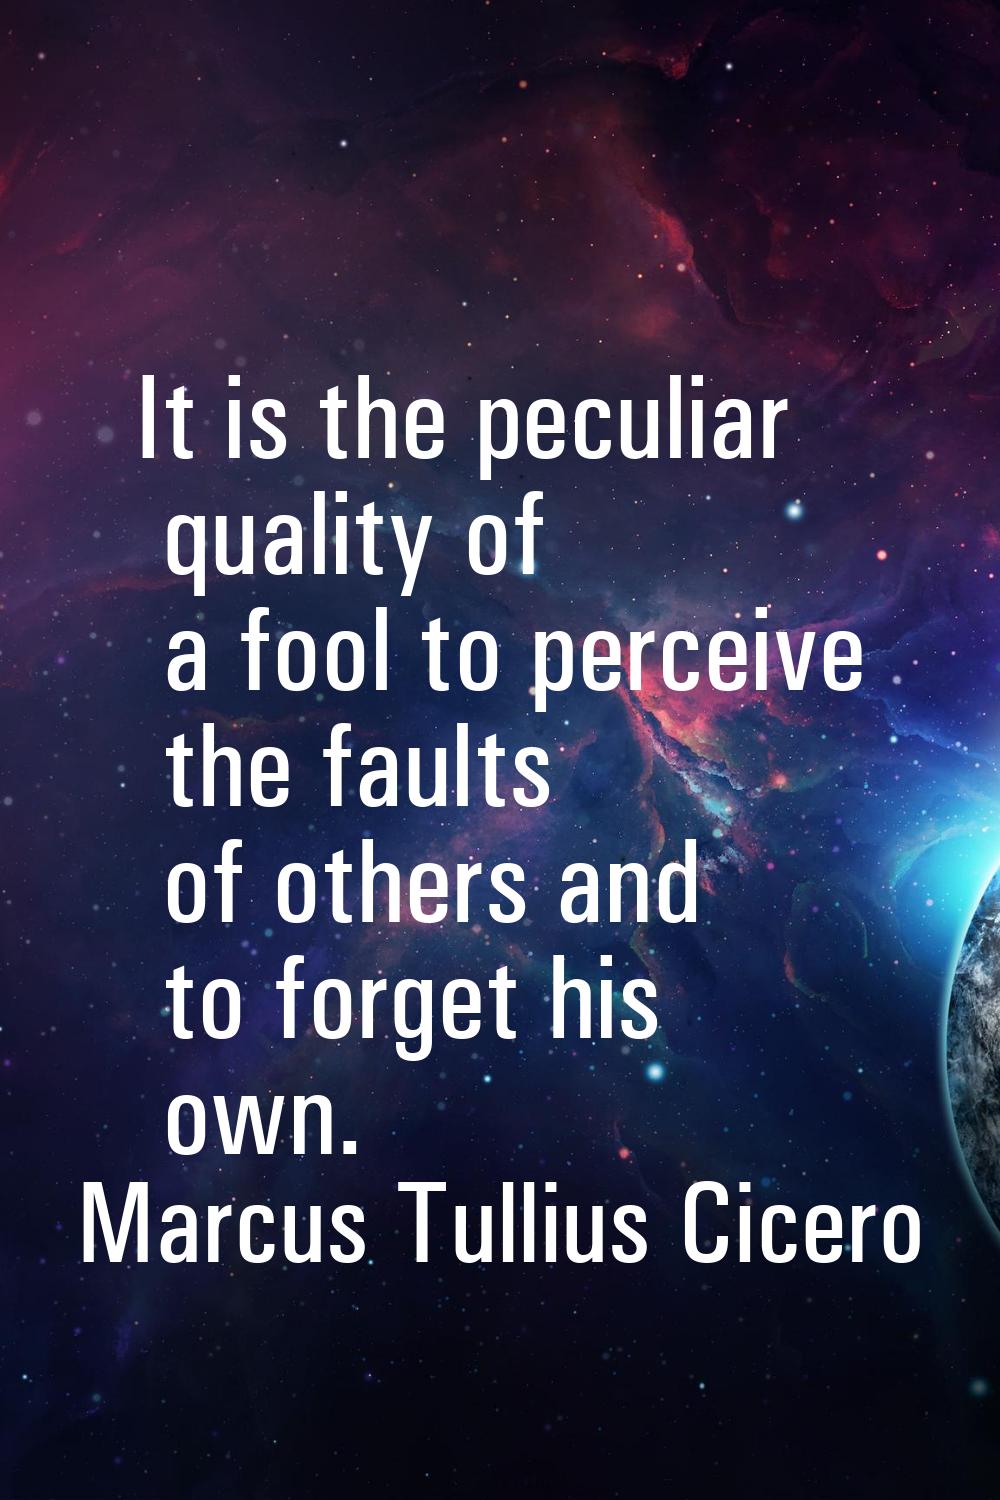 It is the peculiar quality of a fool to perceive the faults of others and to forget his own.